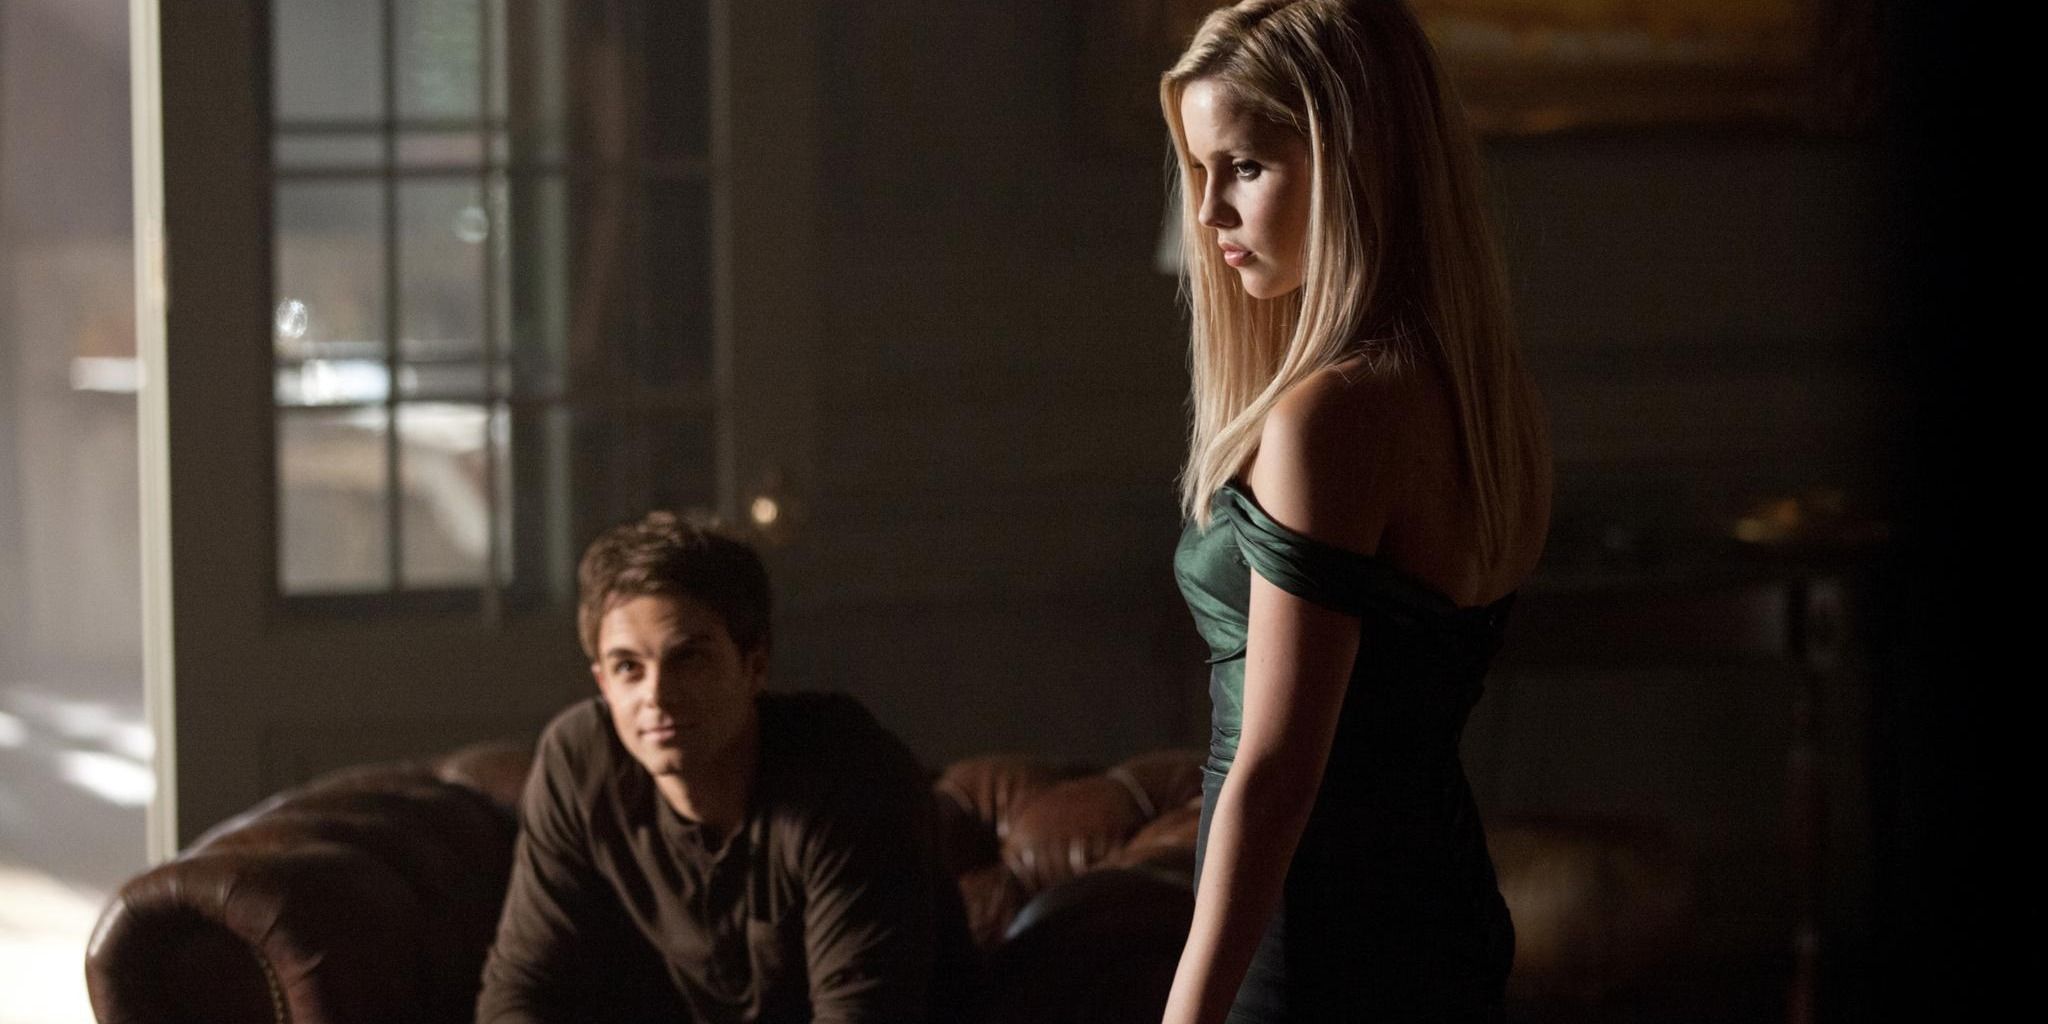 Rebekah standing as Kol Mikaelson sits down on couch